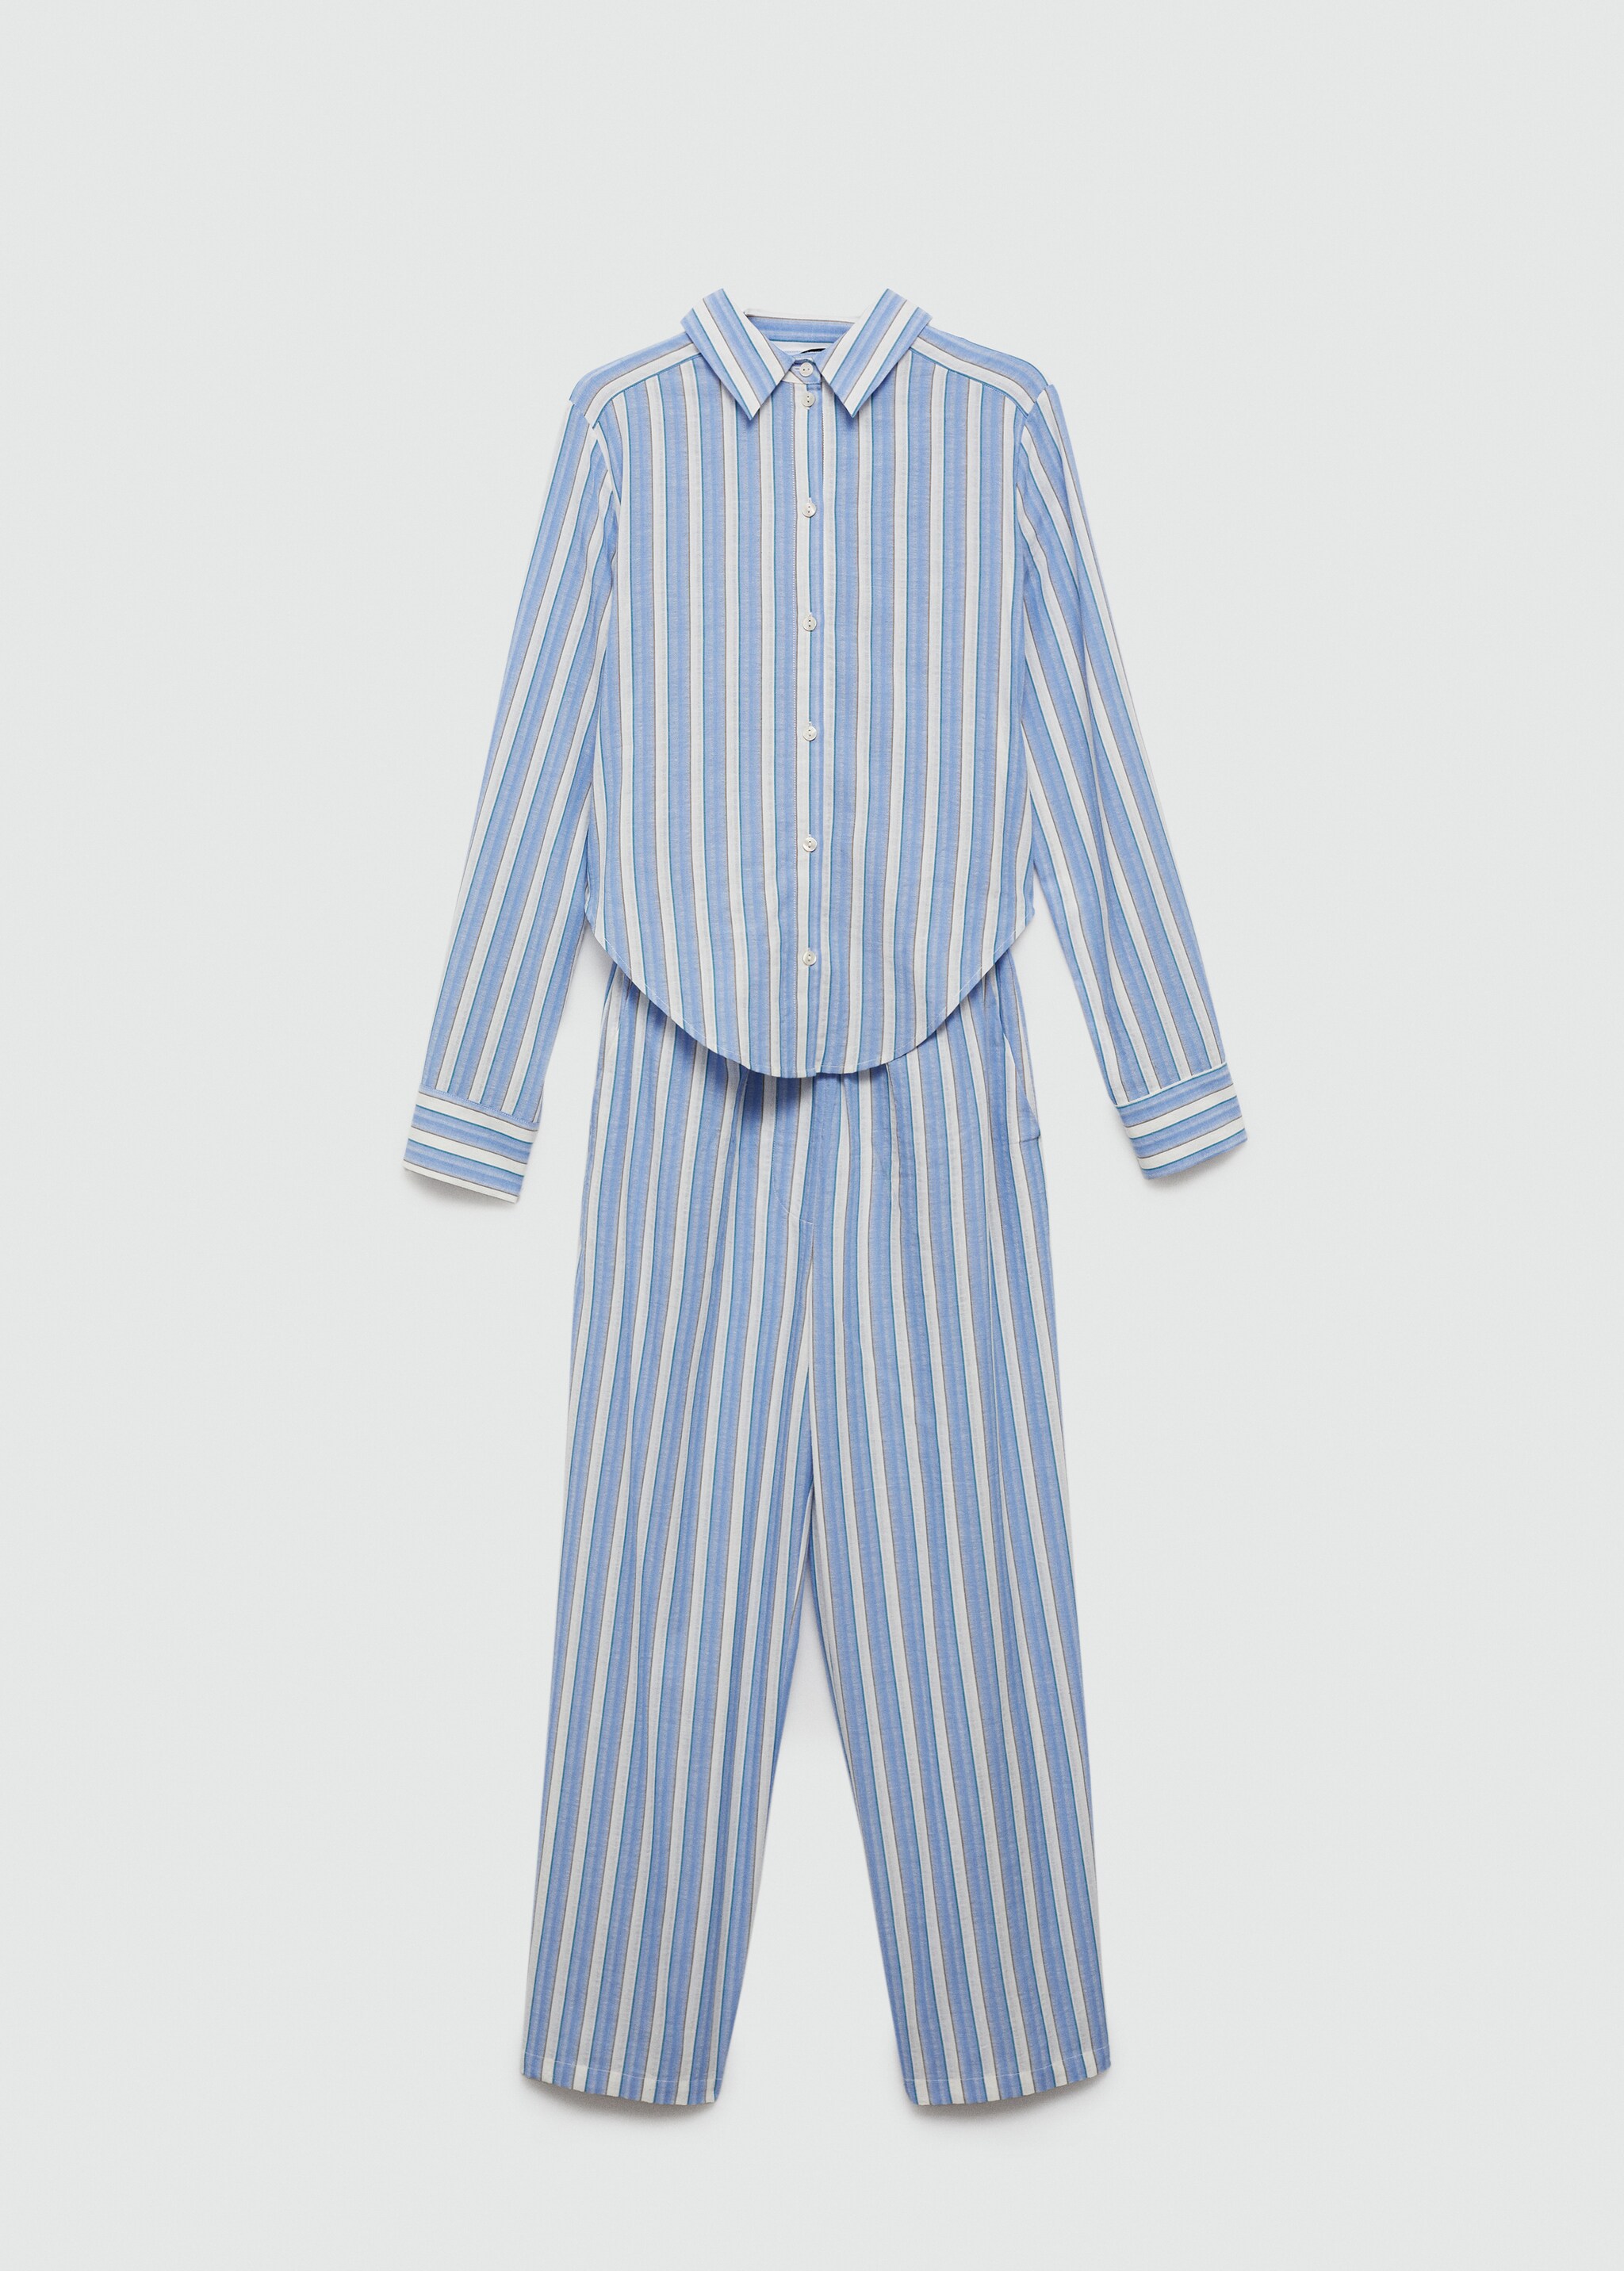 Striped shirt jumpsuit - Article without model